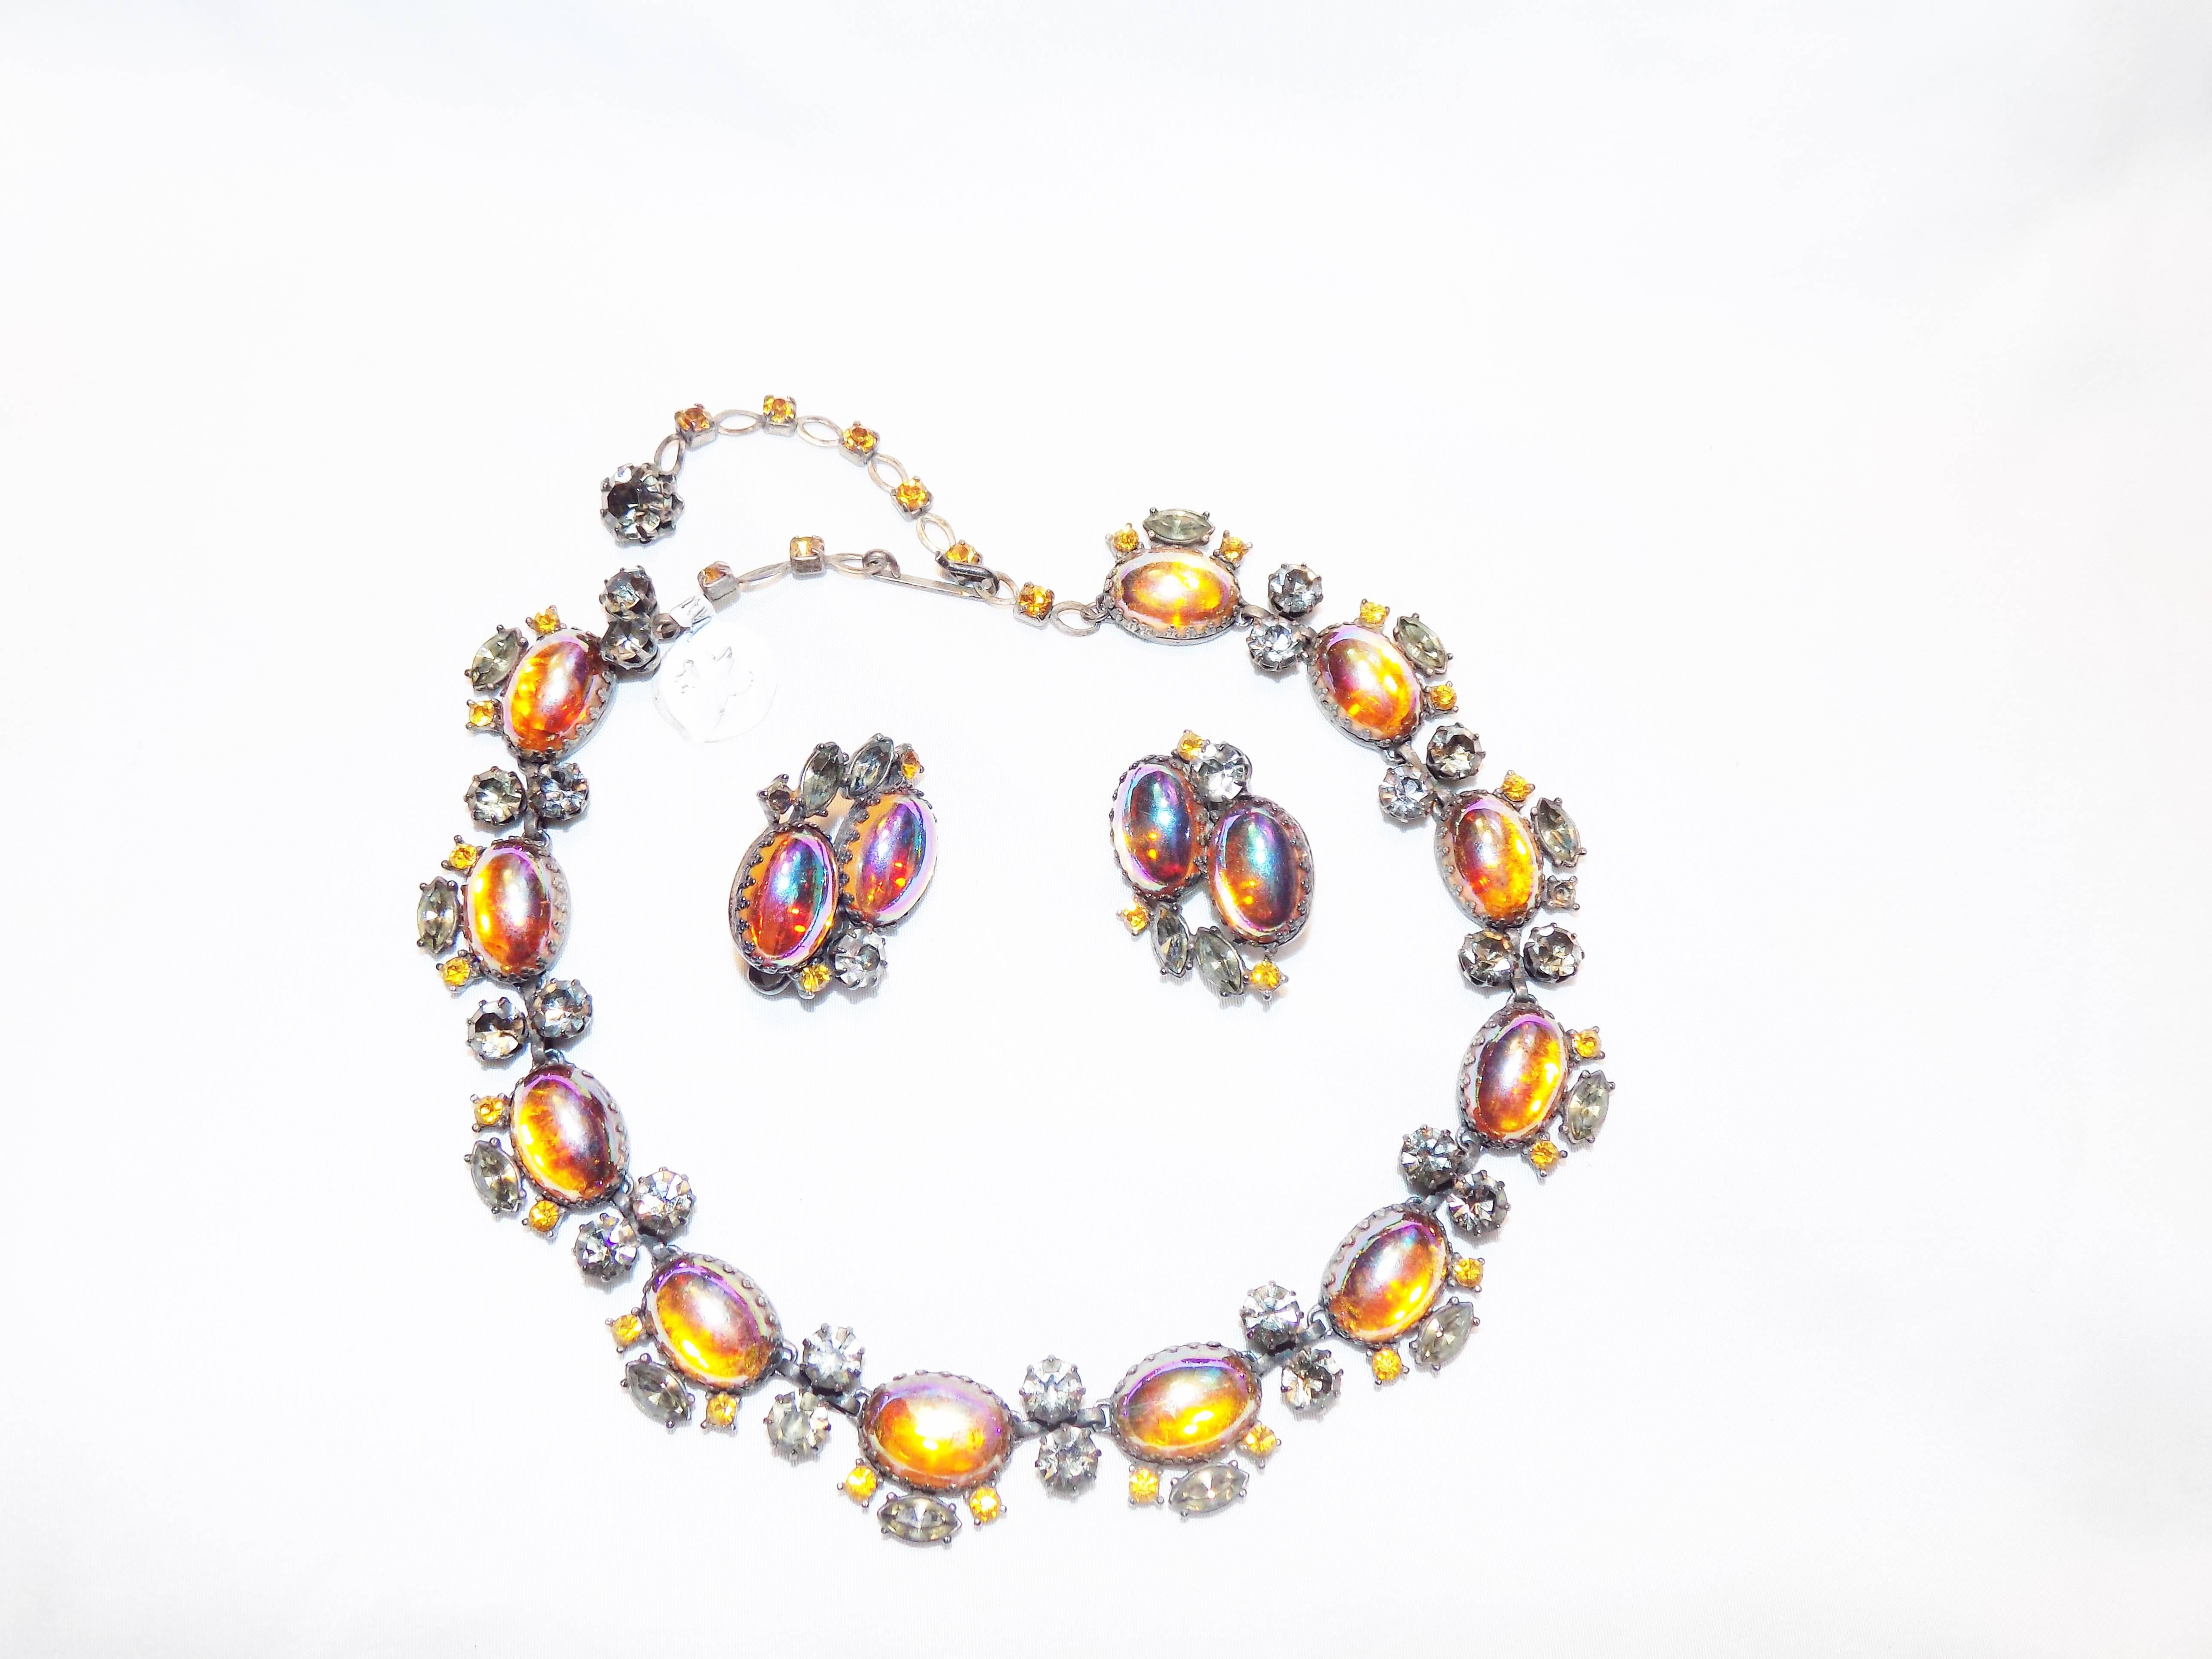 Famous for his cabochon jewelry  Vandome created this amazing choker necklace and earrings set. Circa late 50's . Pristine condition. Necklace is adjustable 16 inch length. Earrings are clip style. Very beautiful piece. 